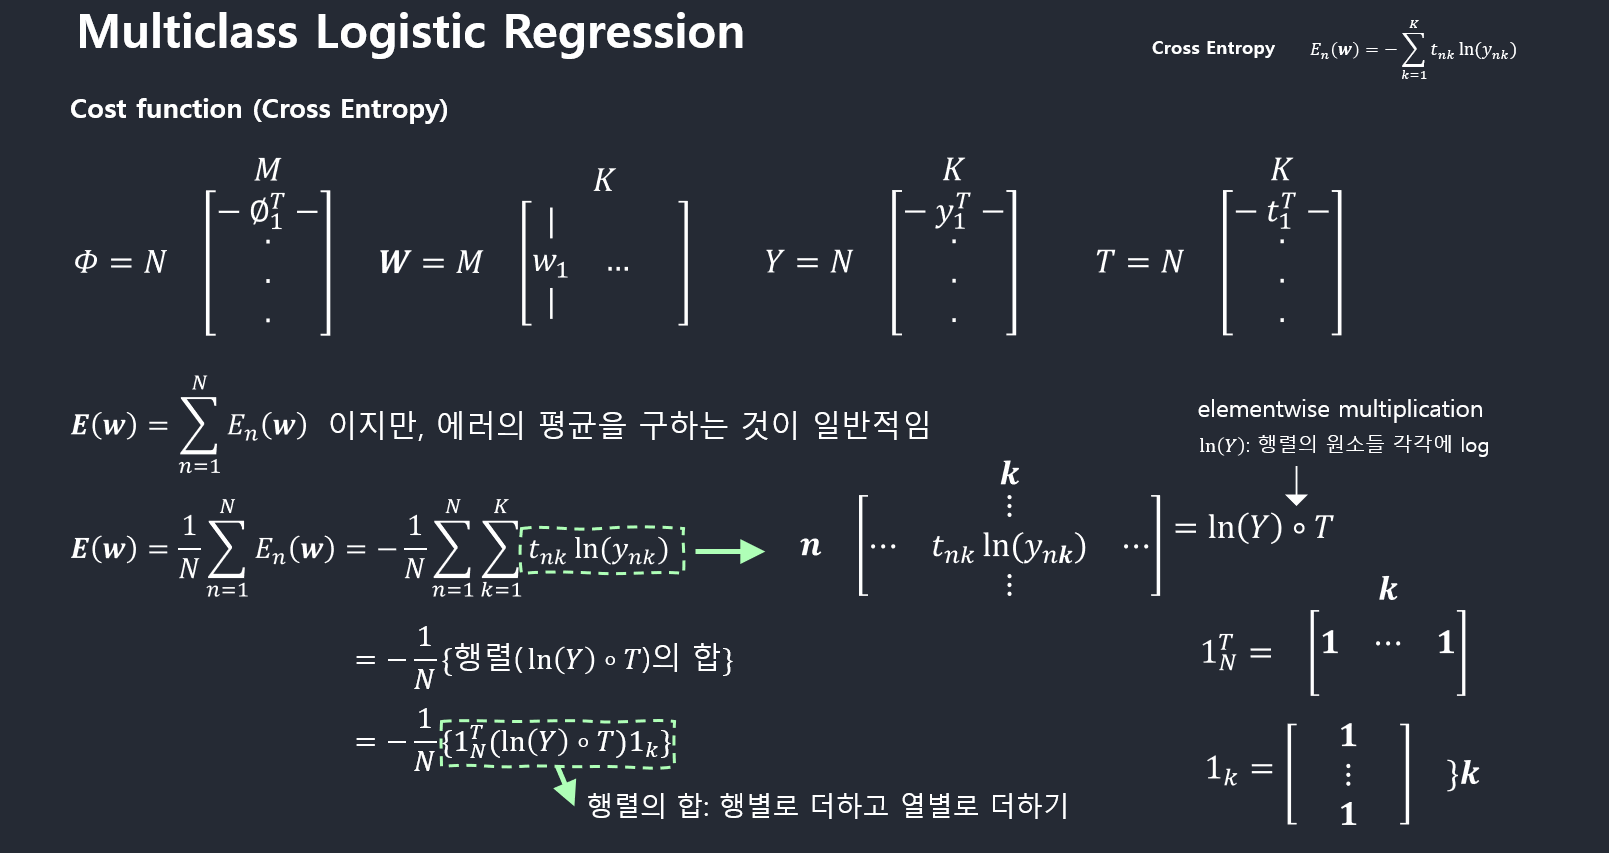 multiclass-logistic-regression-cost-function